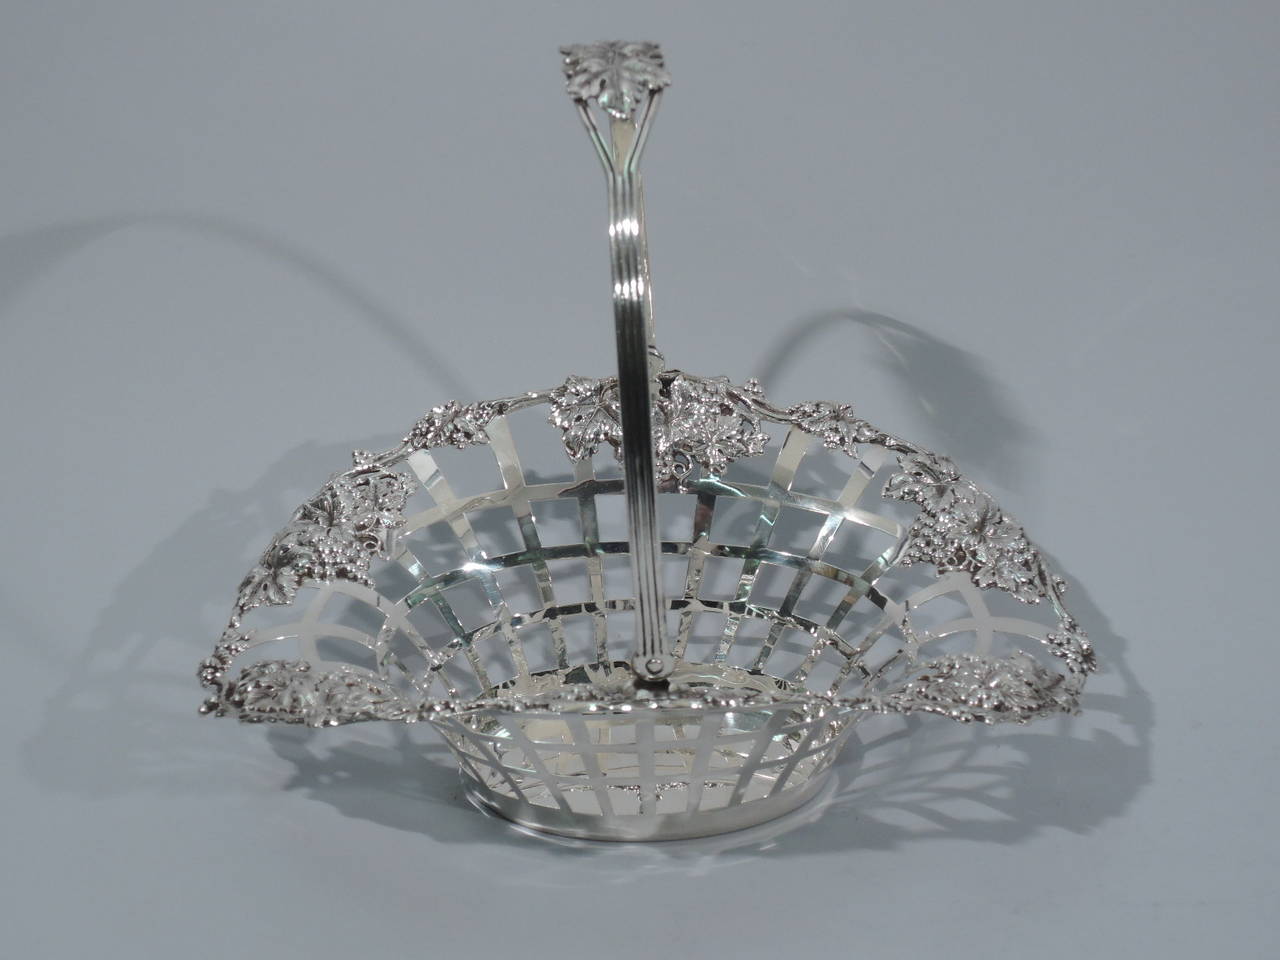 Sterling silver basket with grape bunches. Made by Lebkuecher in Newark, circa 1900. Sold and oval well. Sides are open lattice with flared mouth. Vine rim with grape bunches applied to interior. Reeded and tapering swing handle with central leaves.